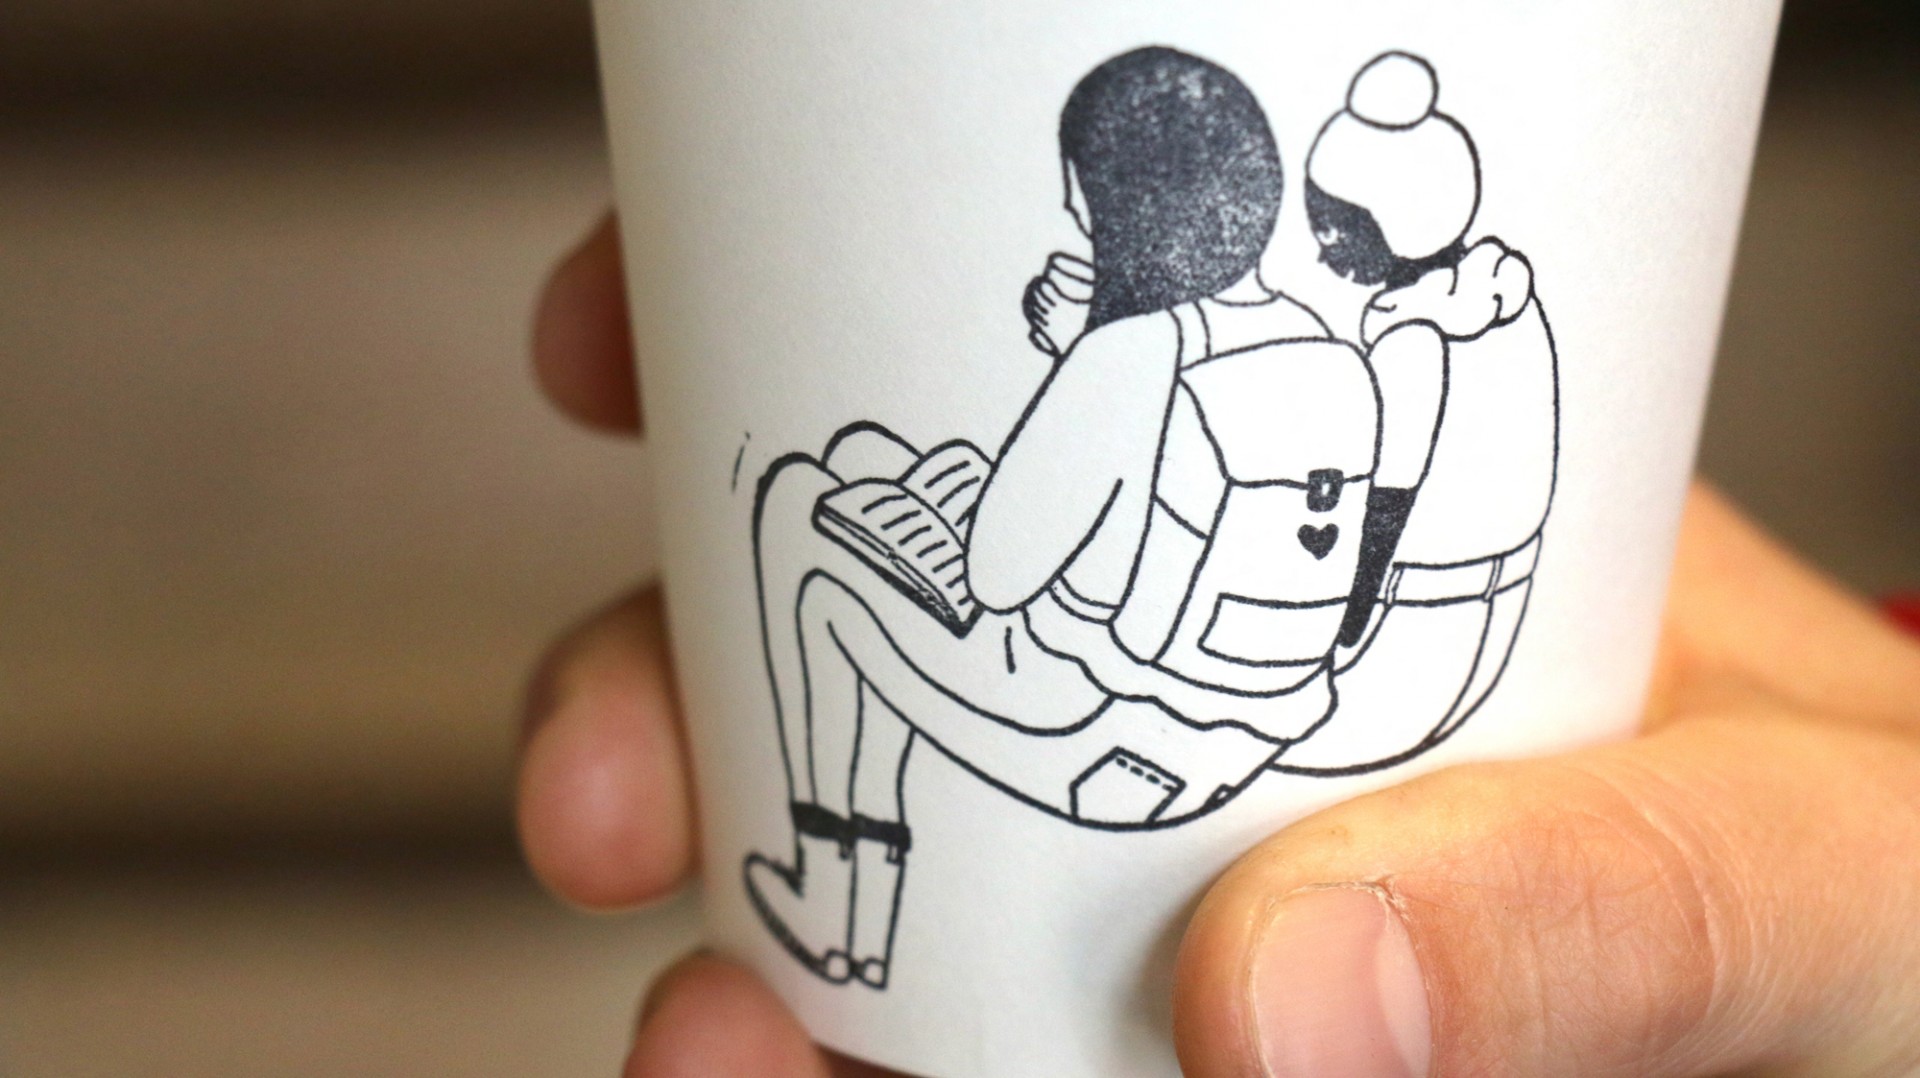 Hand holding coffee up with a stamped illustration of two girls sitting together